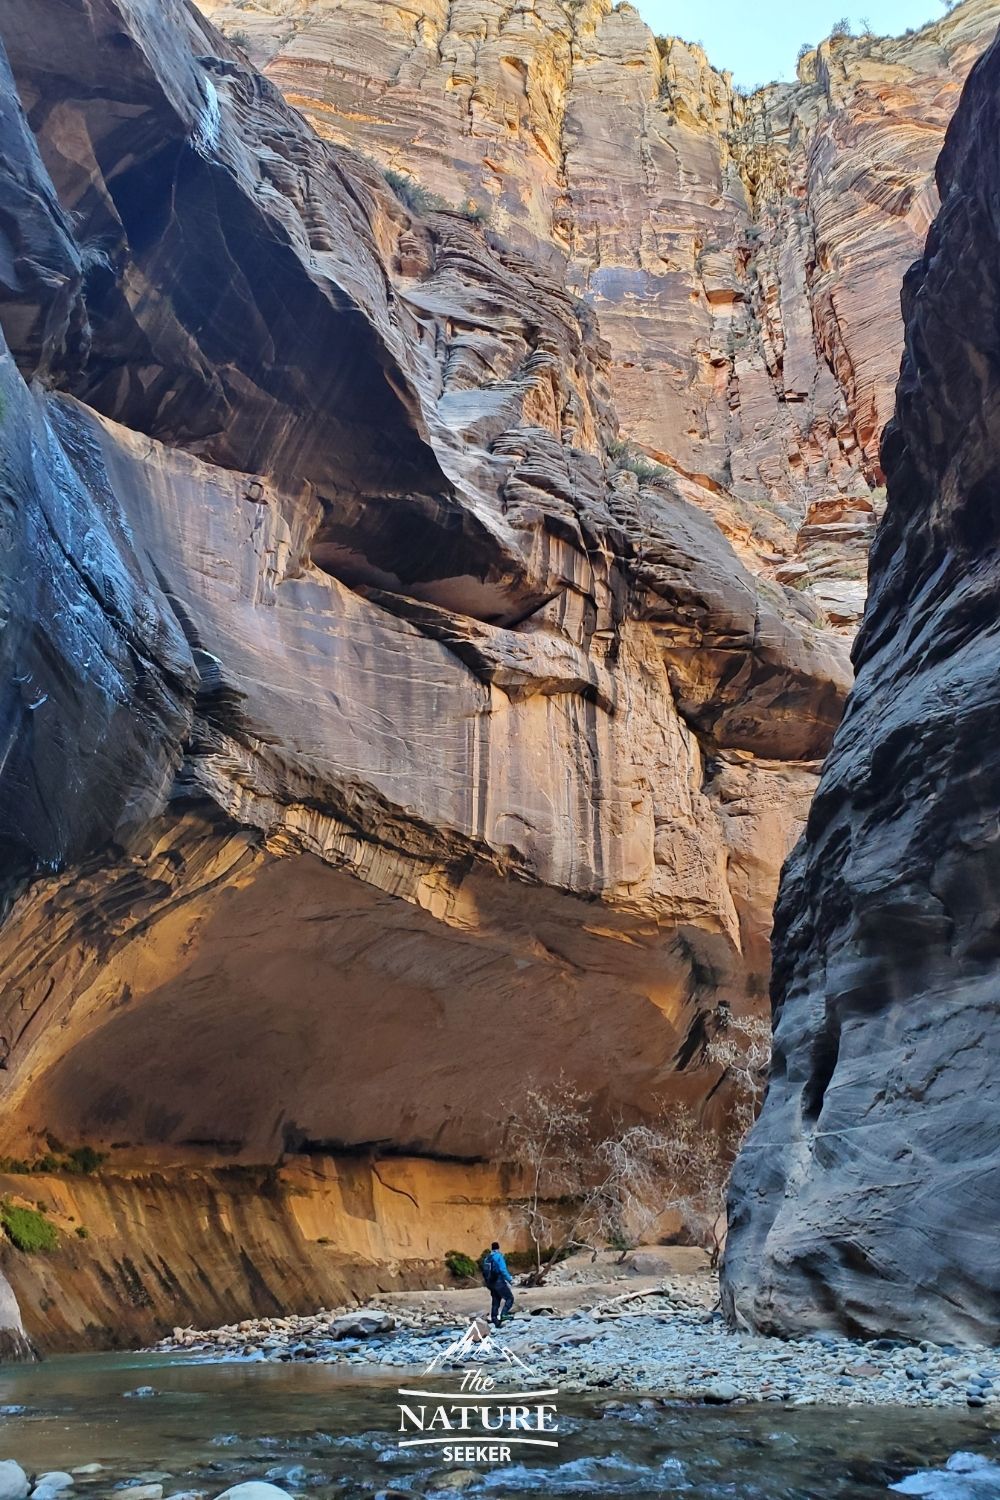 very commonly asked questions and answers about hiking the narrows